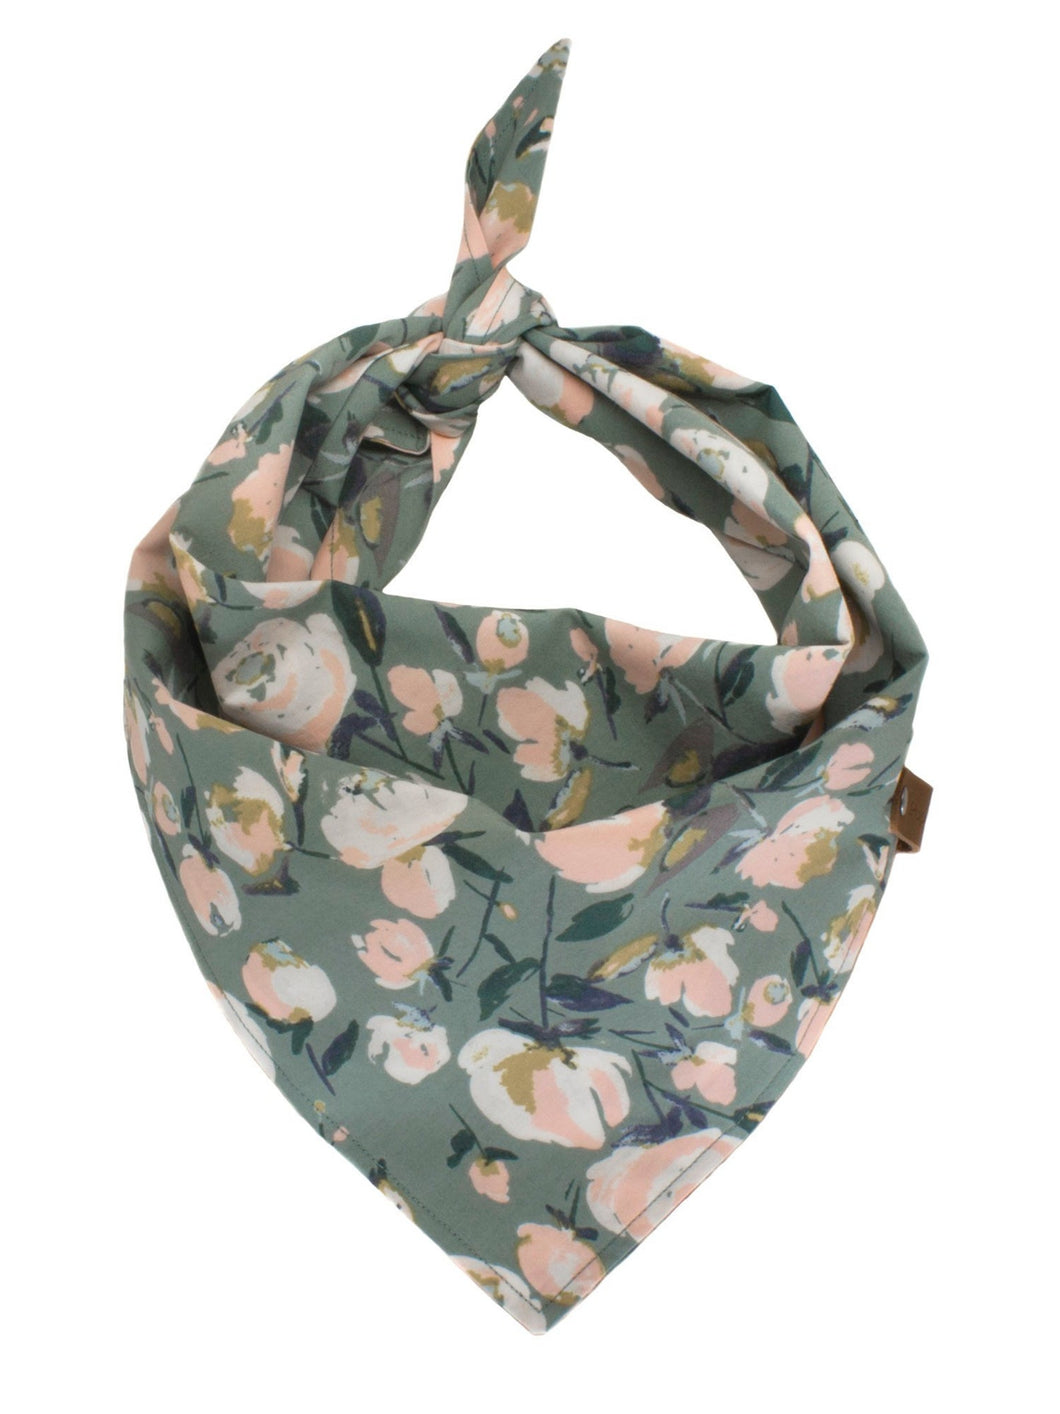 Winter Floral Bandana by Puppy Riot